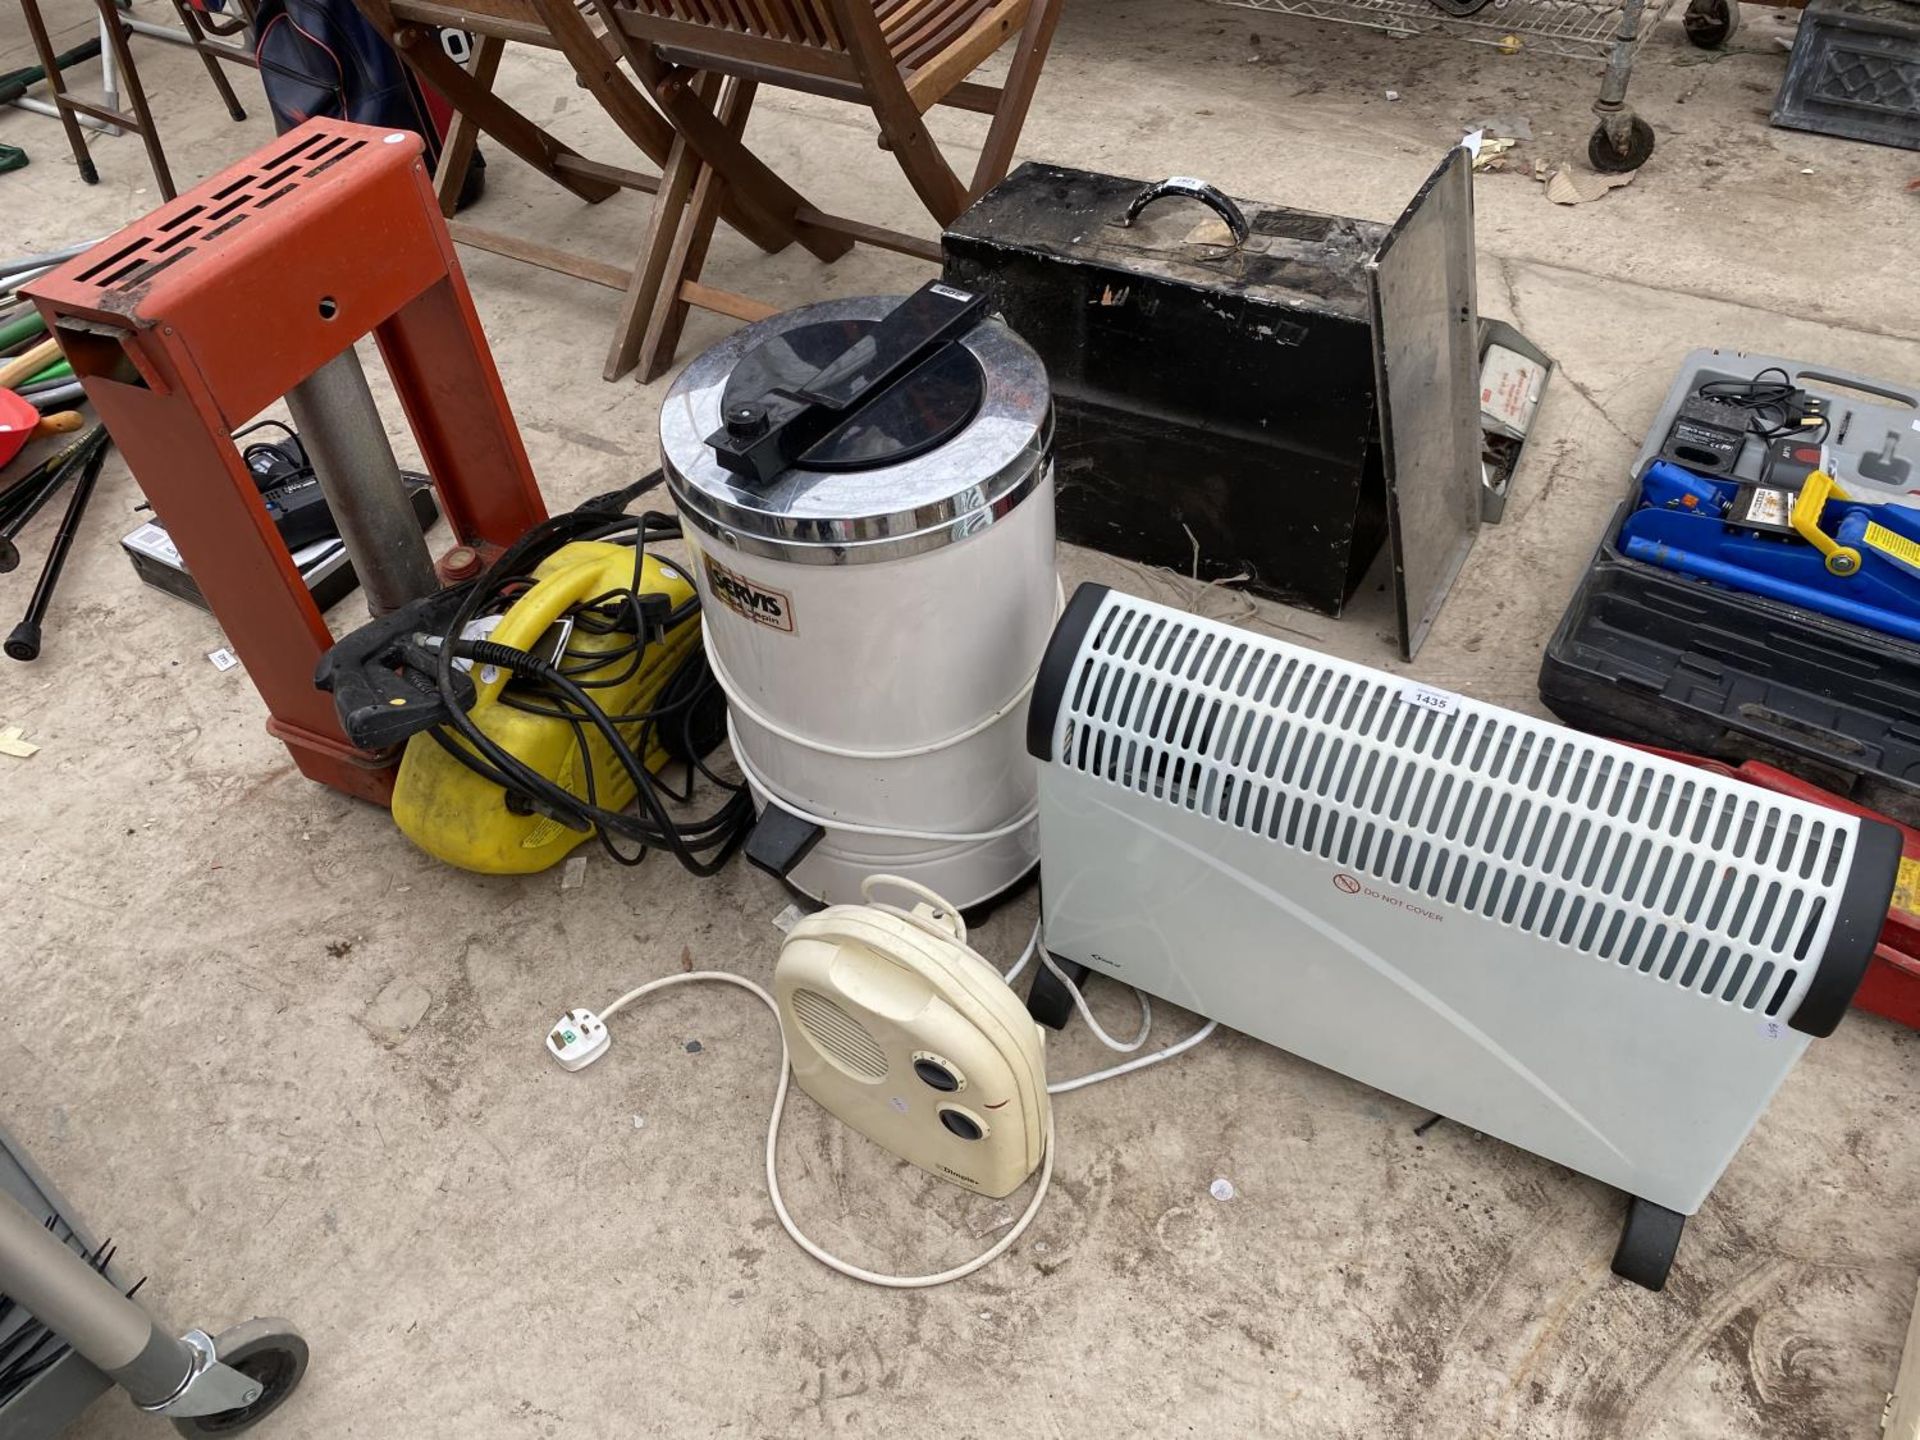 TWO ELECTRIC HEATERS, A SPIN DRYER A PRESSURE WASHER AND AN ALADDIN HEATER